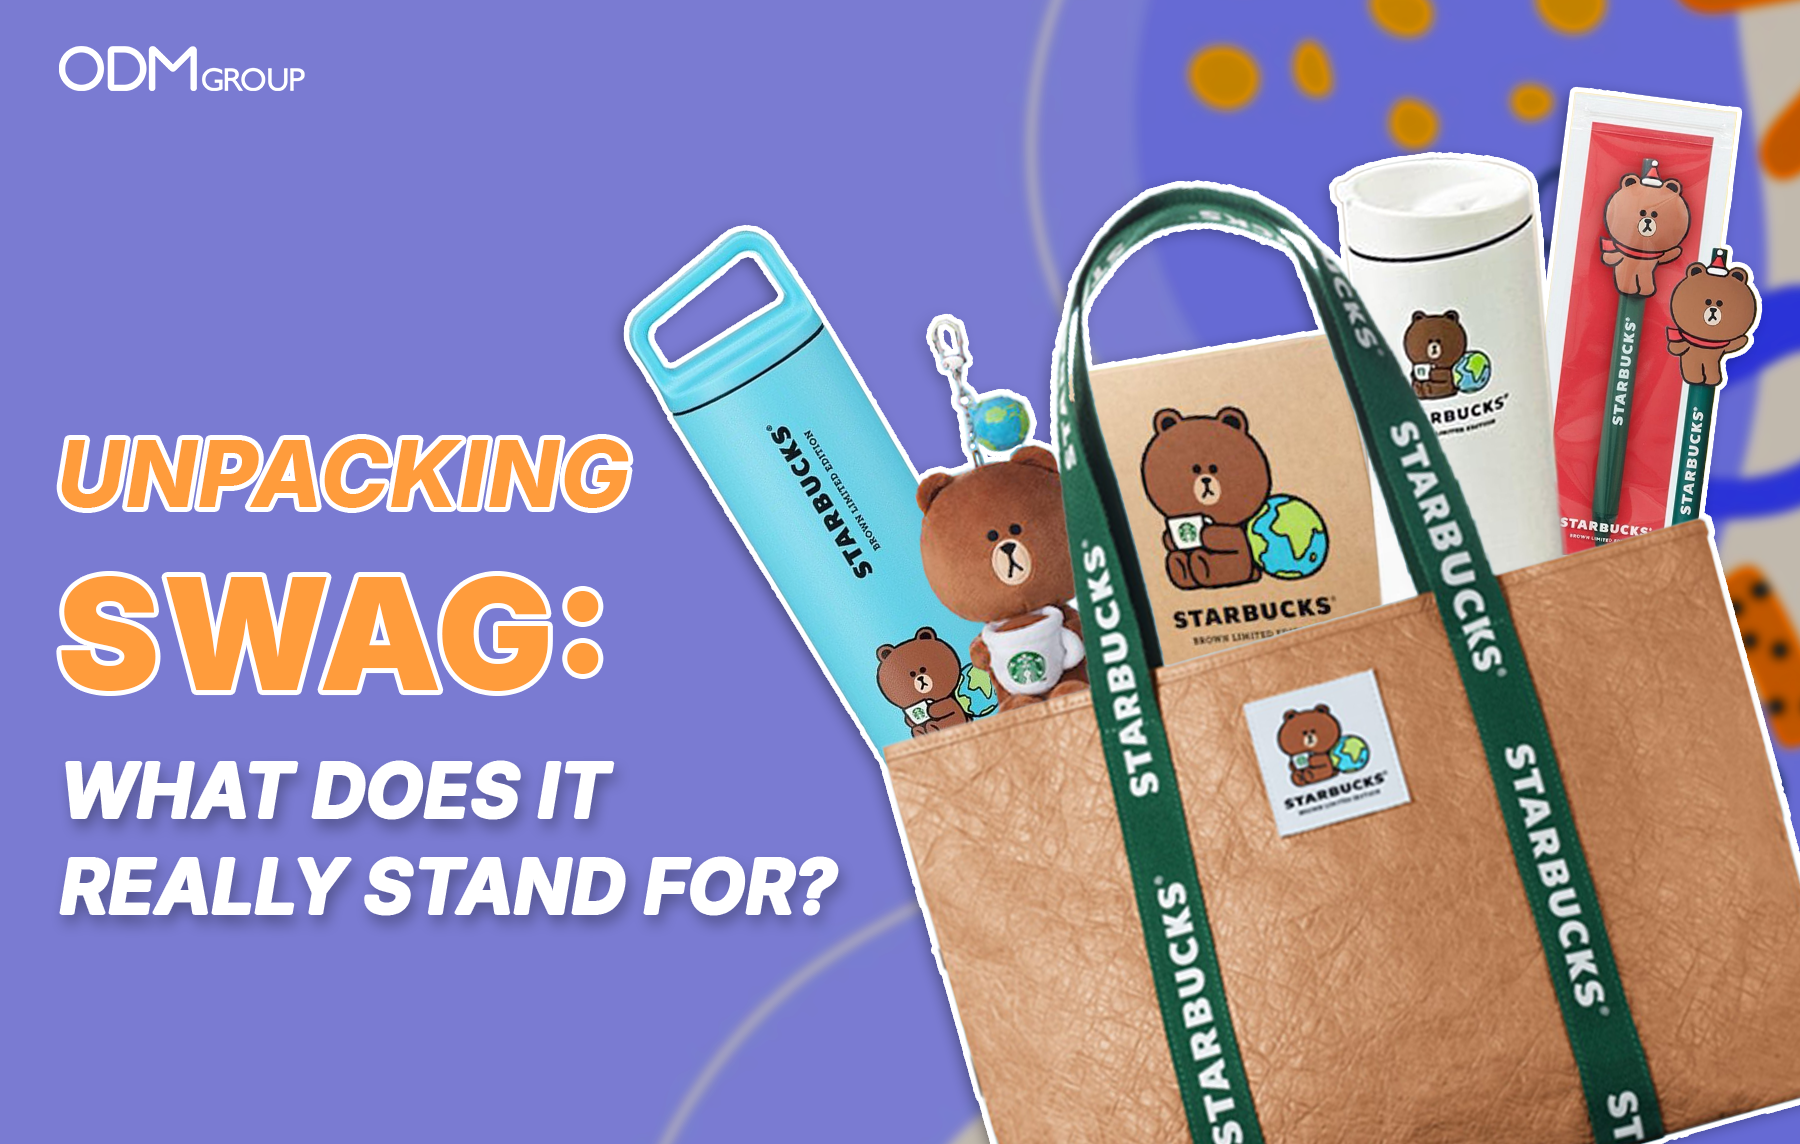 A variety of Starbucks-branded swag items including a tote bag, water bottles, and plush keychains.